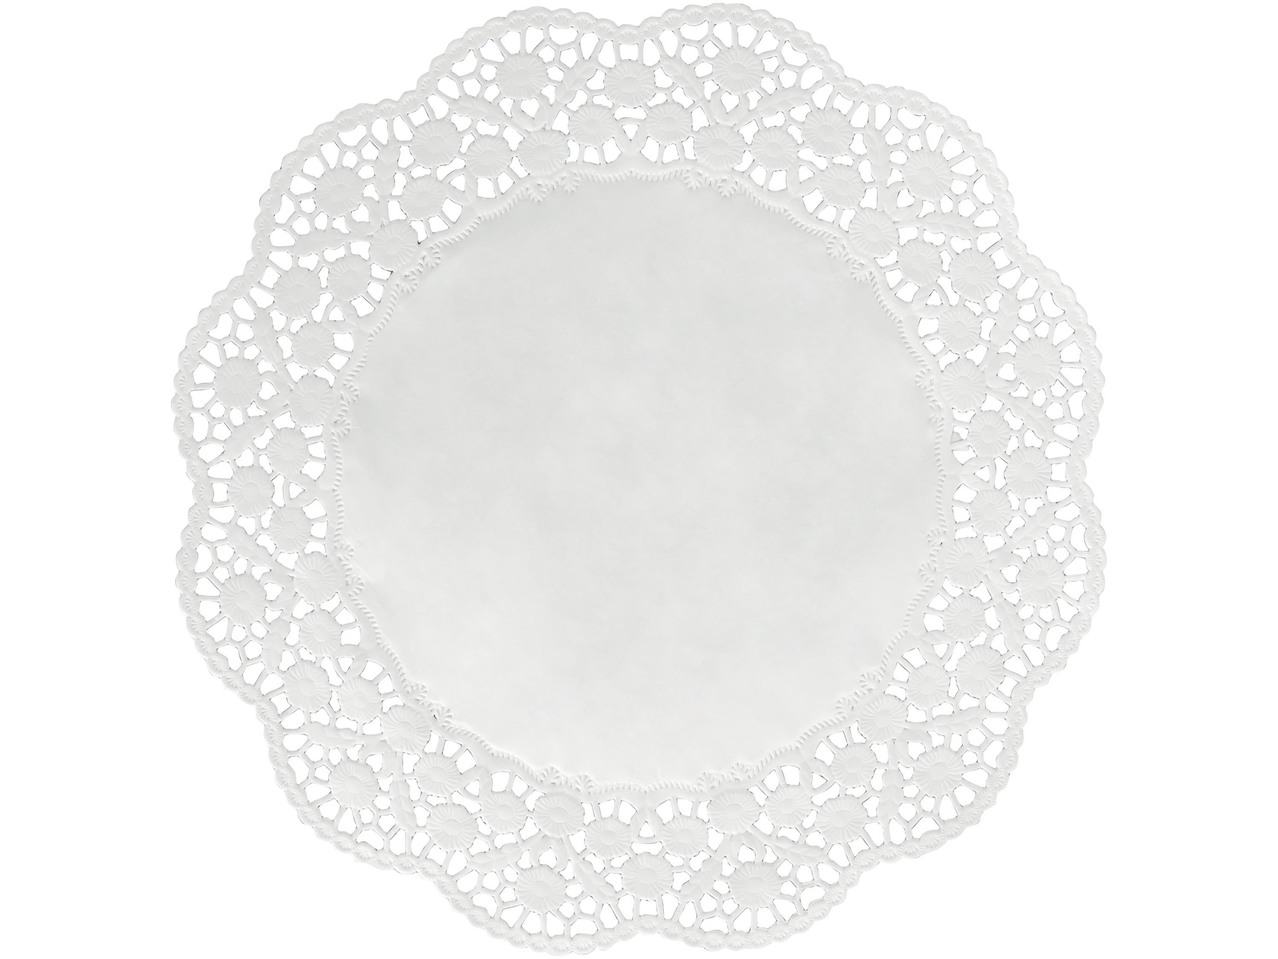 Cake Doilies or Paper Muffin Holders